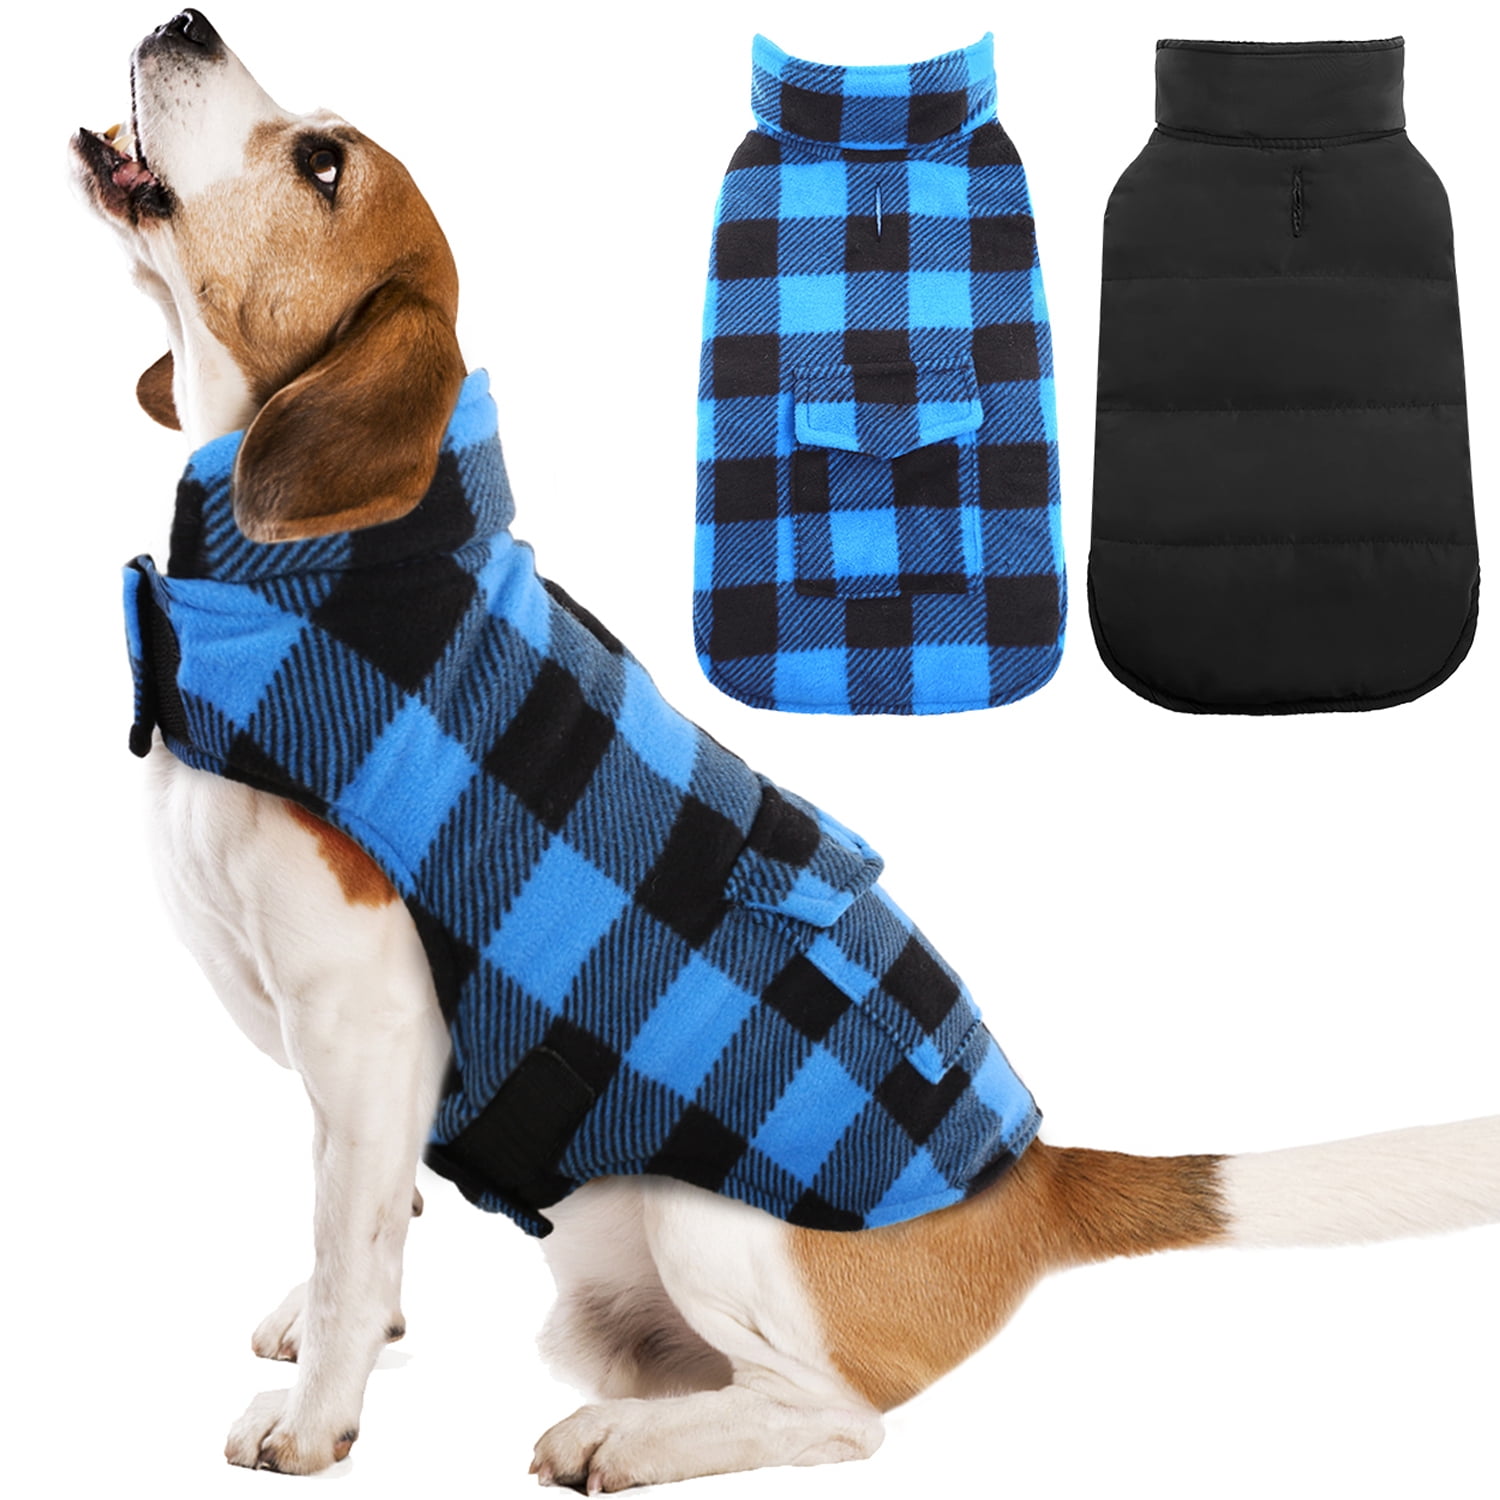 Reversible Cozy Dog Winter Coat Waterproof Windproof British Style Plaid Warm Vest Clothes Apparel for Winter Cold Weather Outfit Soft Sweater for Small Medium Large Dogs Green XXL